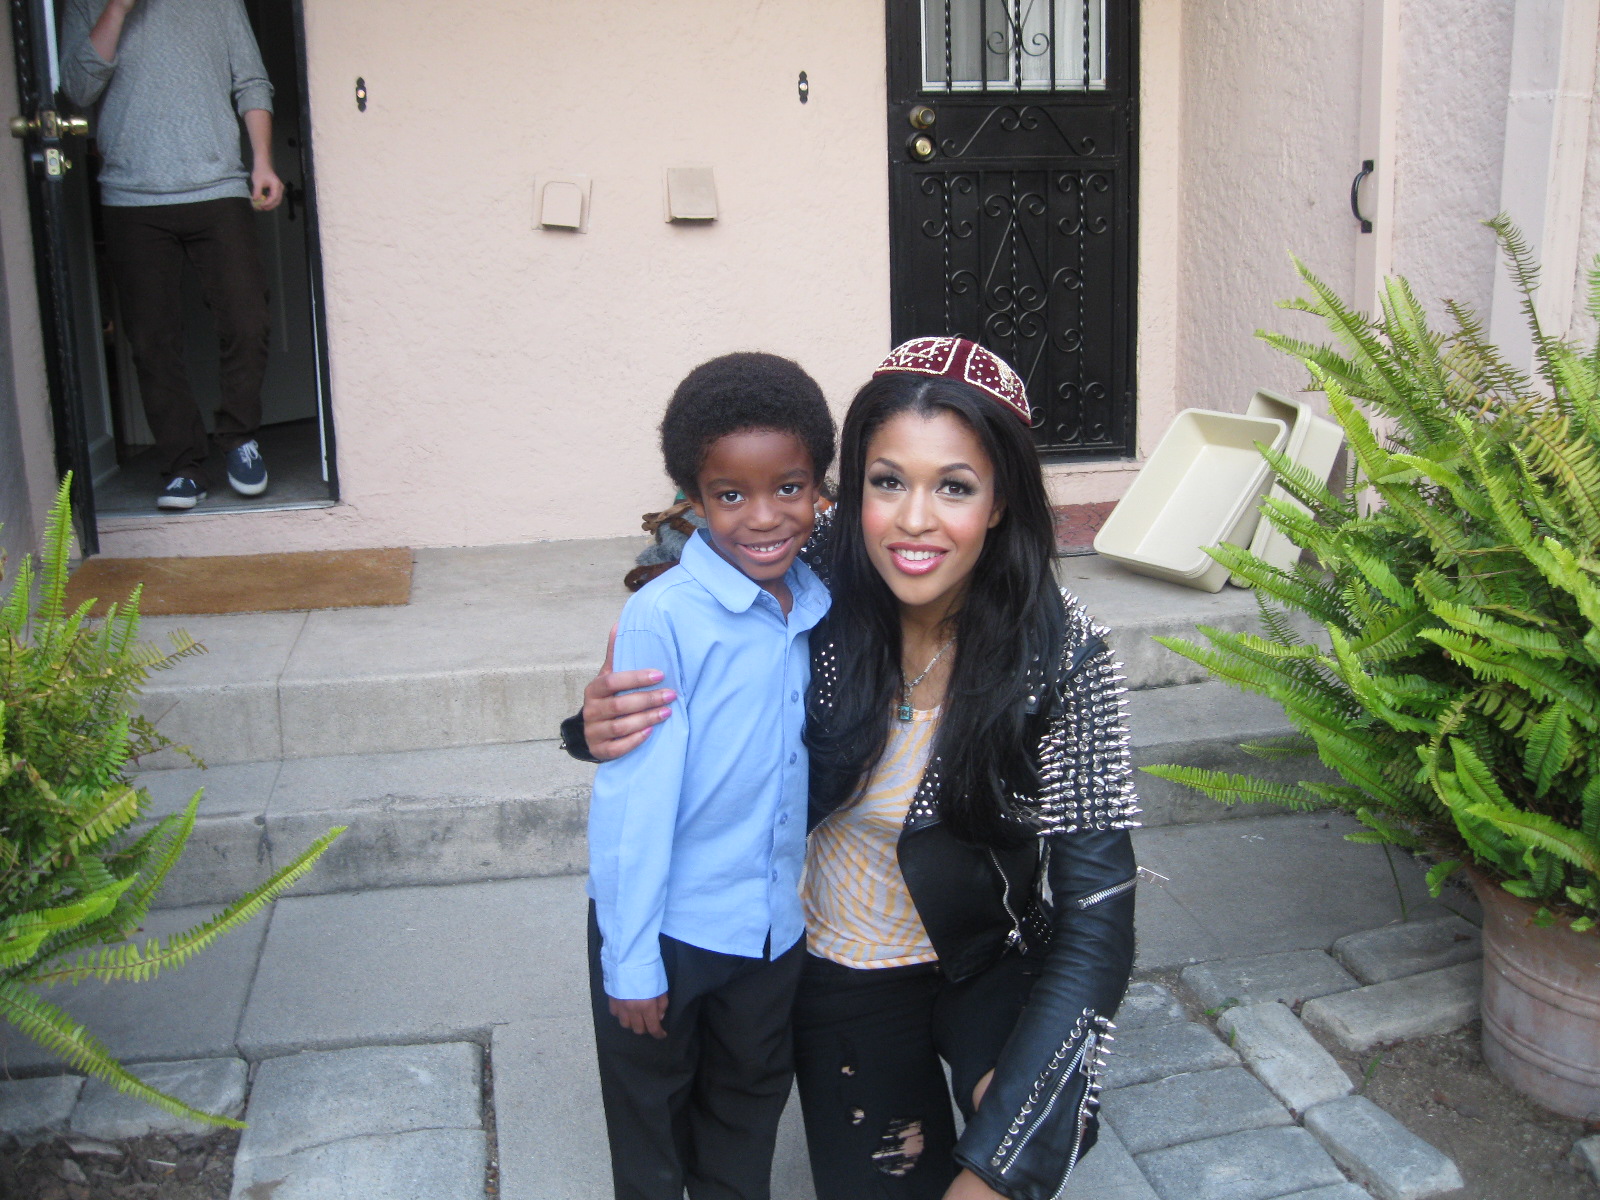 Alex with Kali Hawk from Bridesmaids and Couples Retreat